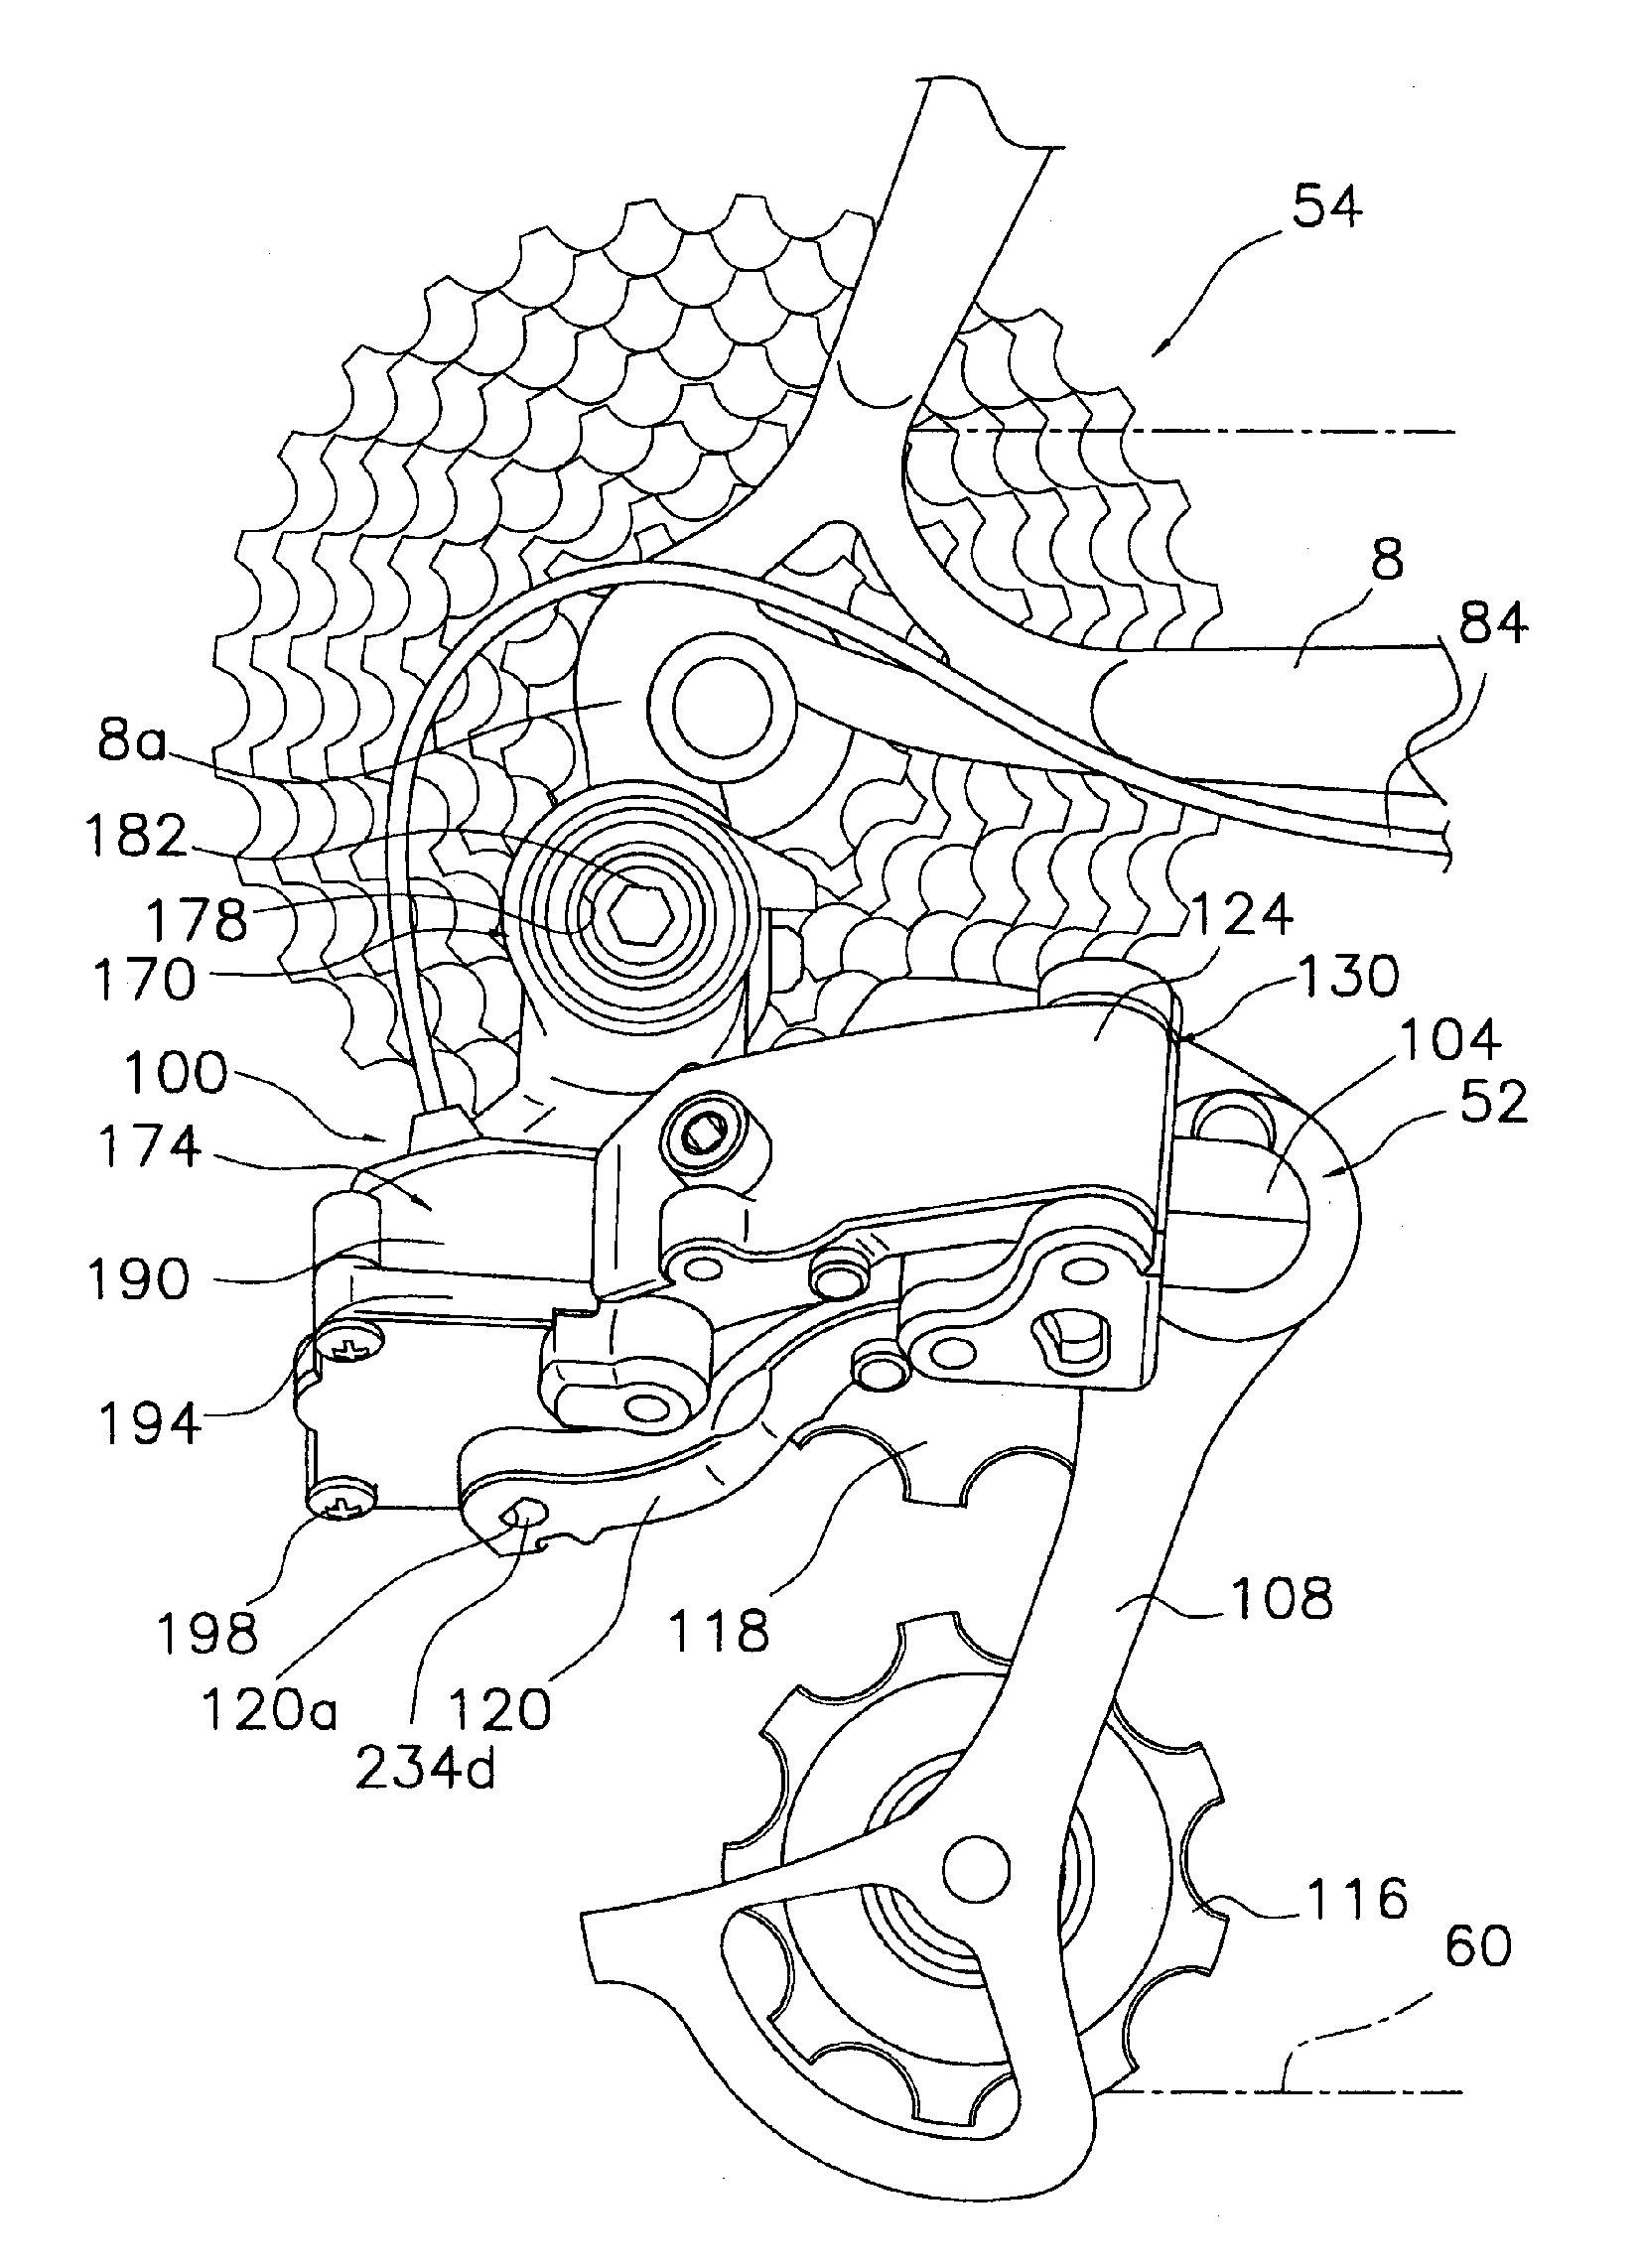 Apparatus for inhibiting undesirable movement of a bicycle electrical component